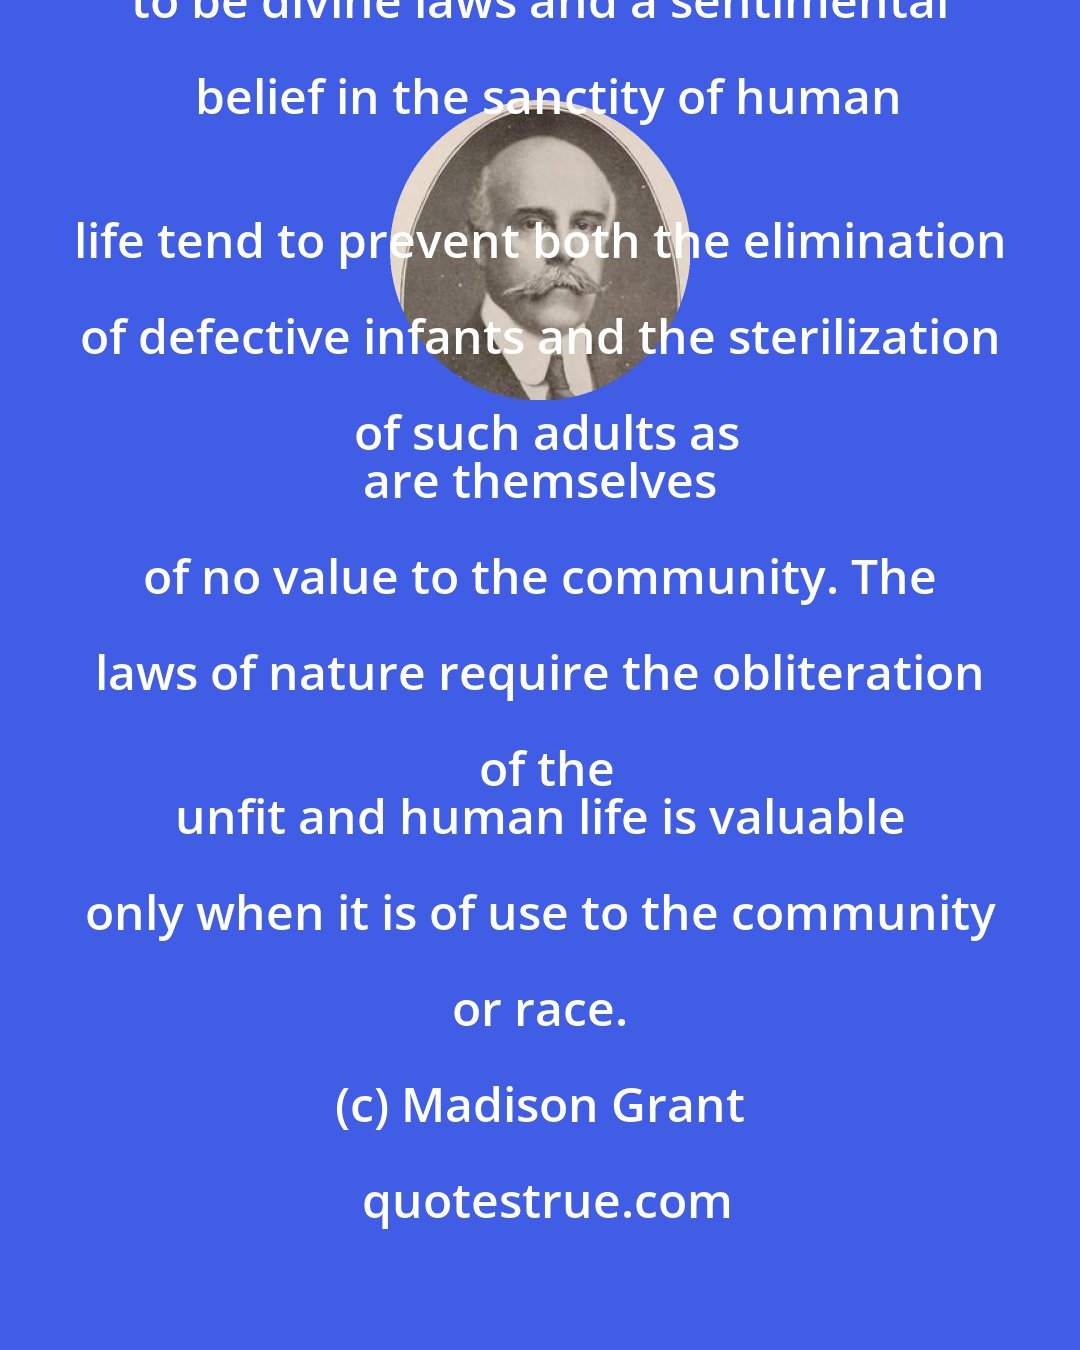 Madison Grant: Mistaken
 regard for what are believed to be divine laws and a sentimental belief in the sanctity of human
 life tend to prevent both the elimination of defective infants and the sterilization of such adults as
 are themselves of no value to the community. The laws of nature require the obliteration of the
 unfit and human life is valuable only when it is of use to the community or race.